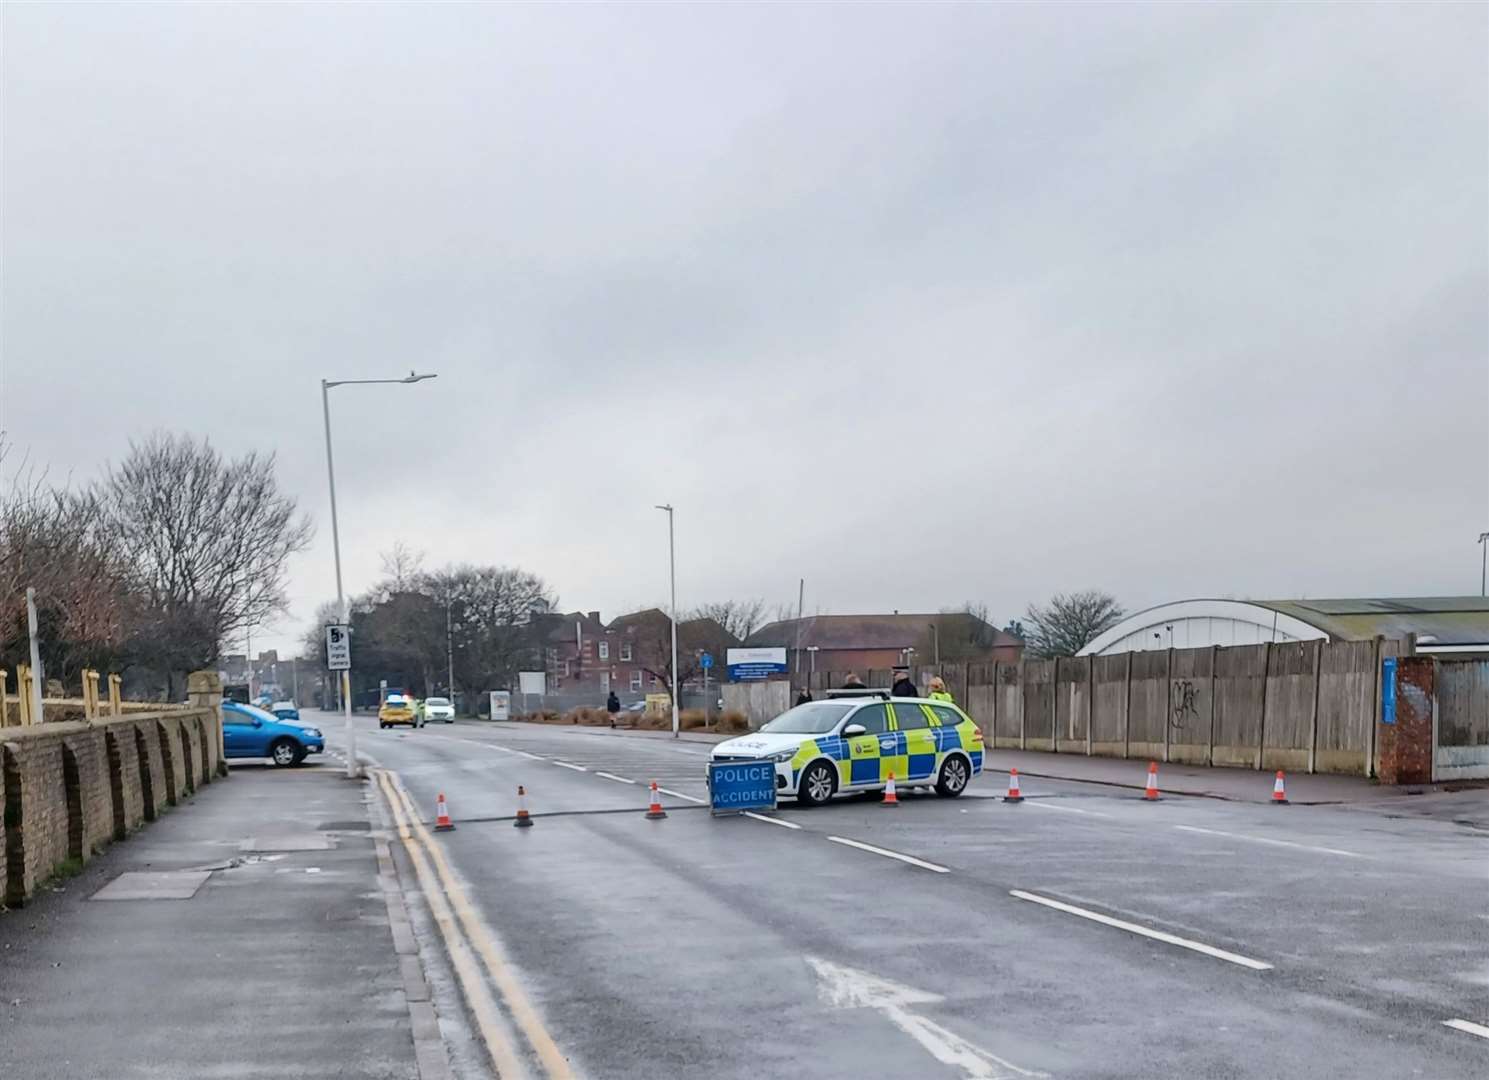 Four police cars are at the scene of a suspected serious incident between the Harvey Grammar School and Morrisons in Folkestone